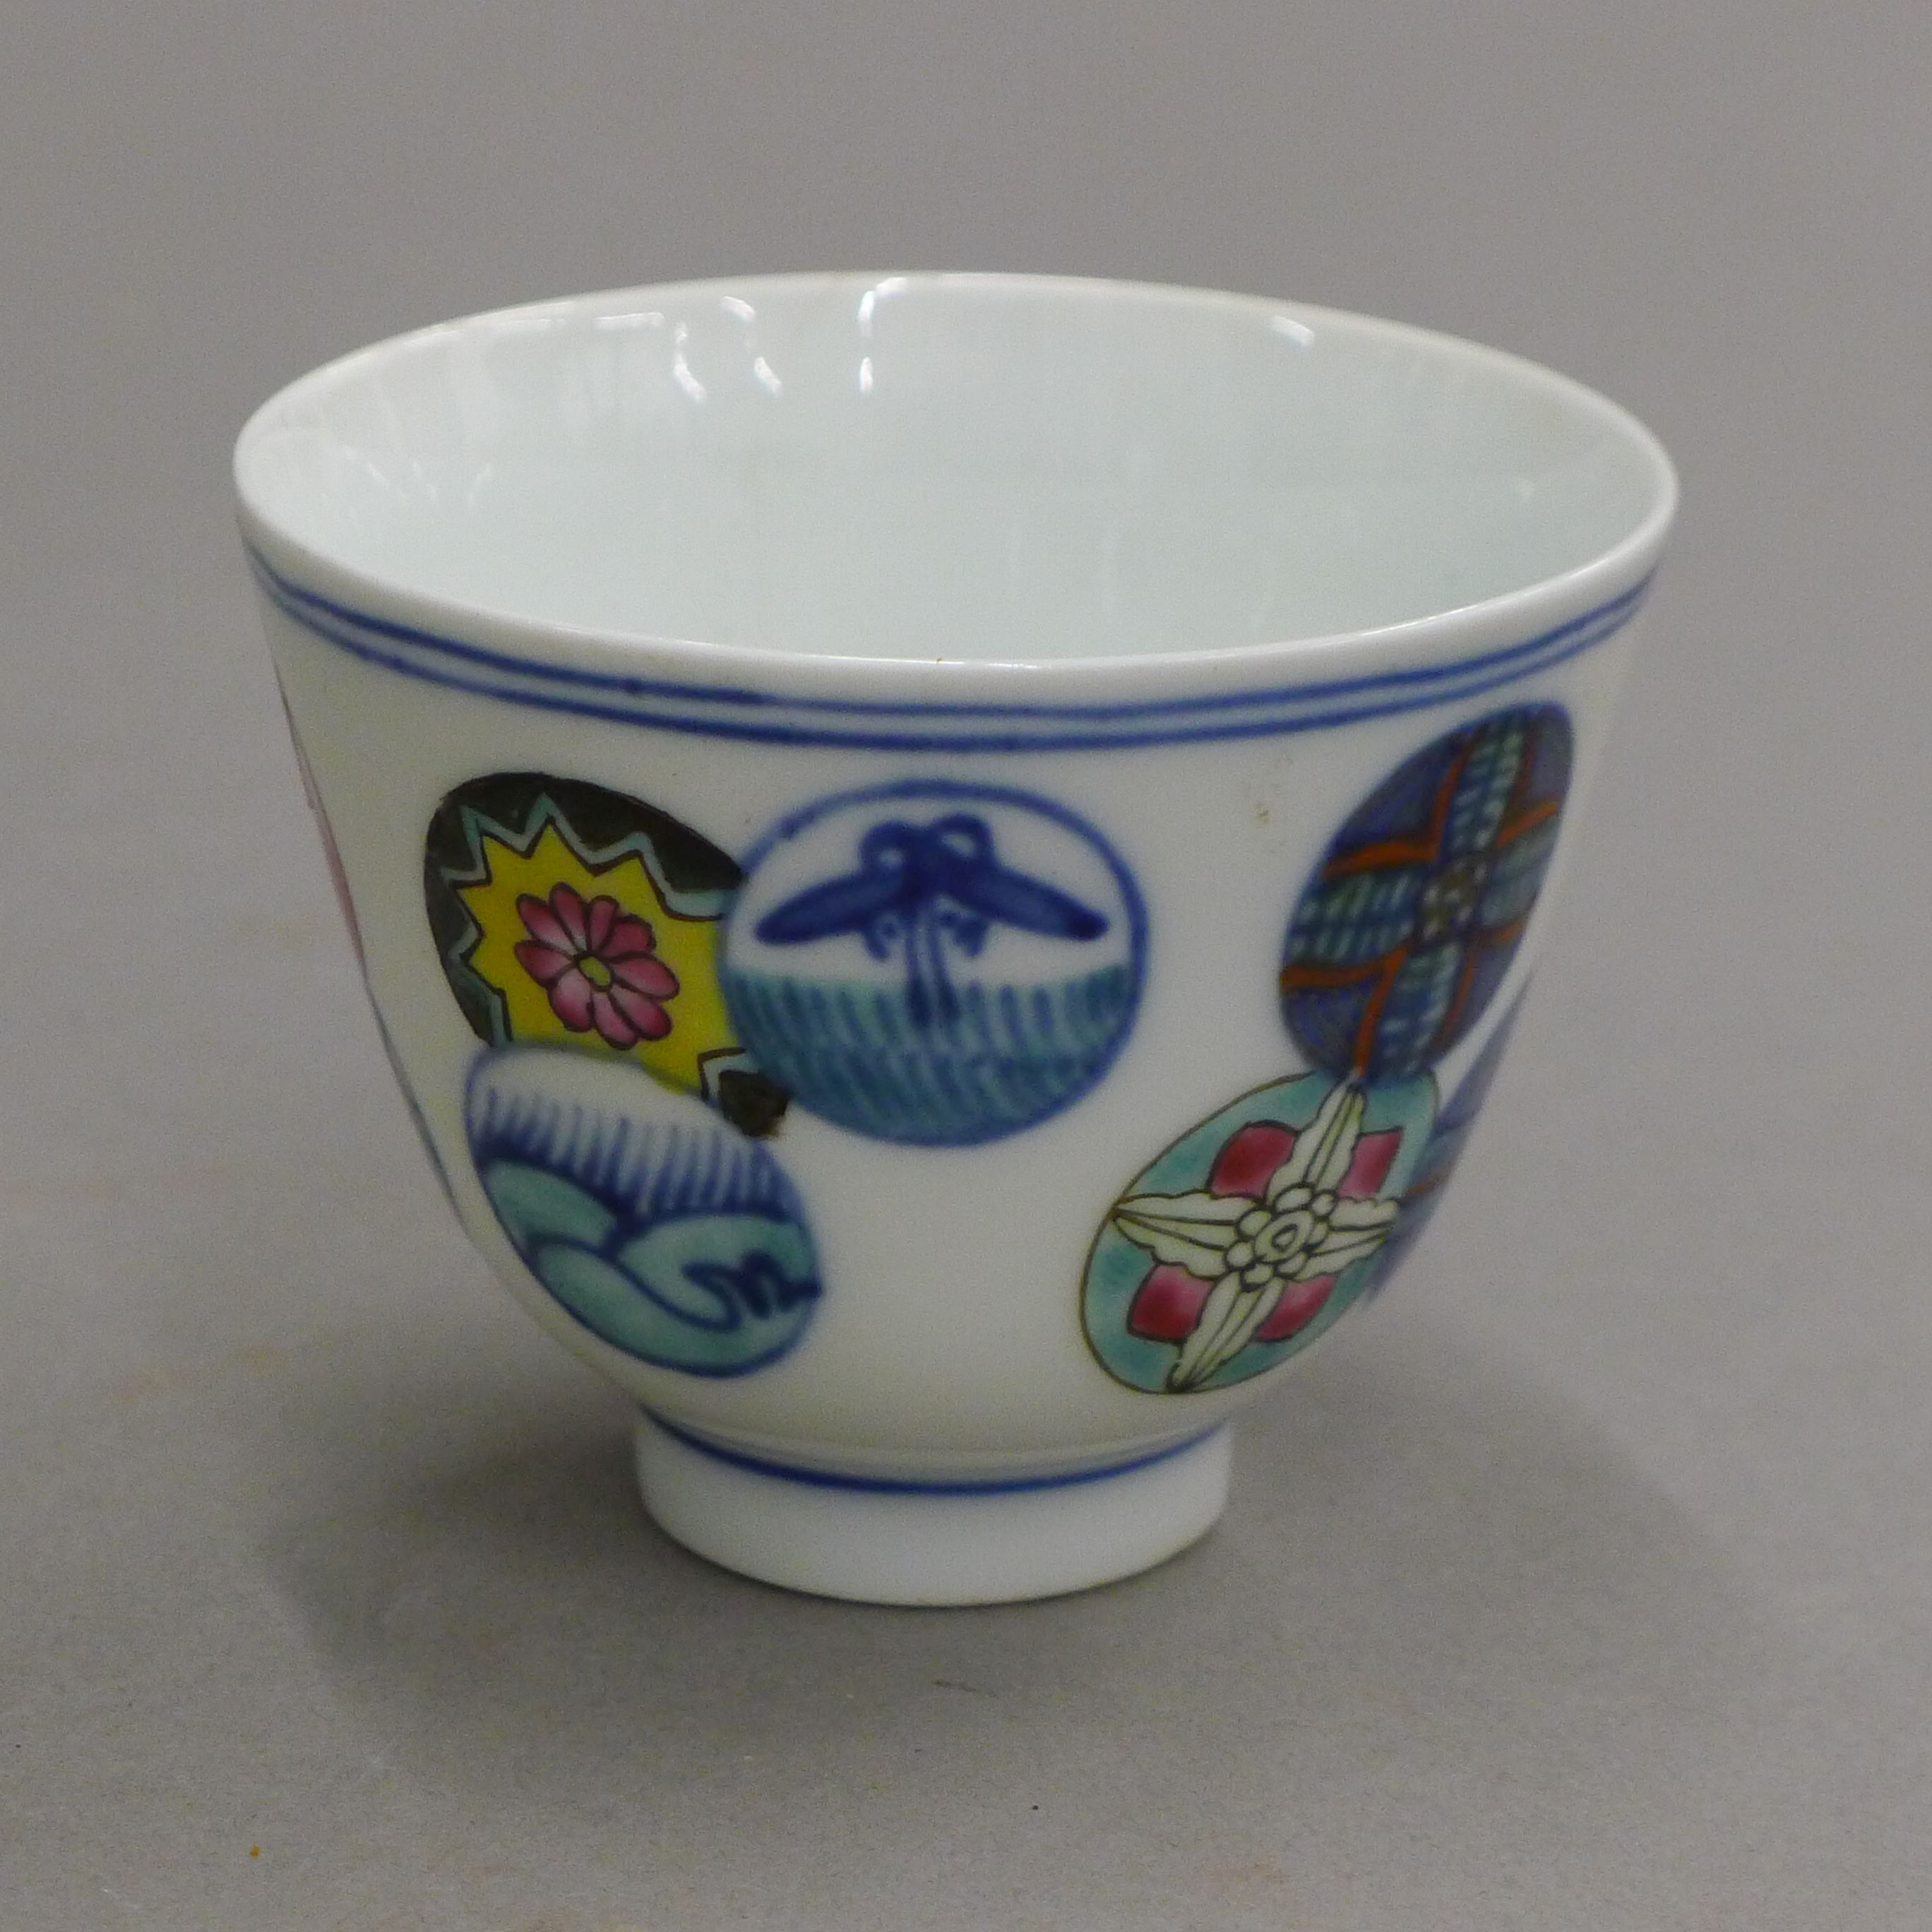 A Chinese porcelain tea bowl decorated with circles. 7.5 cm diameter.